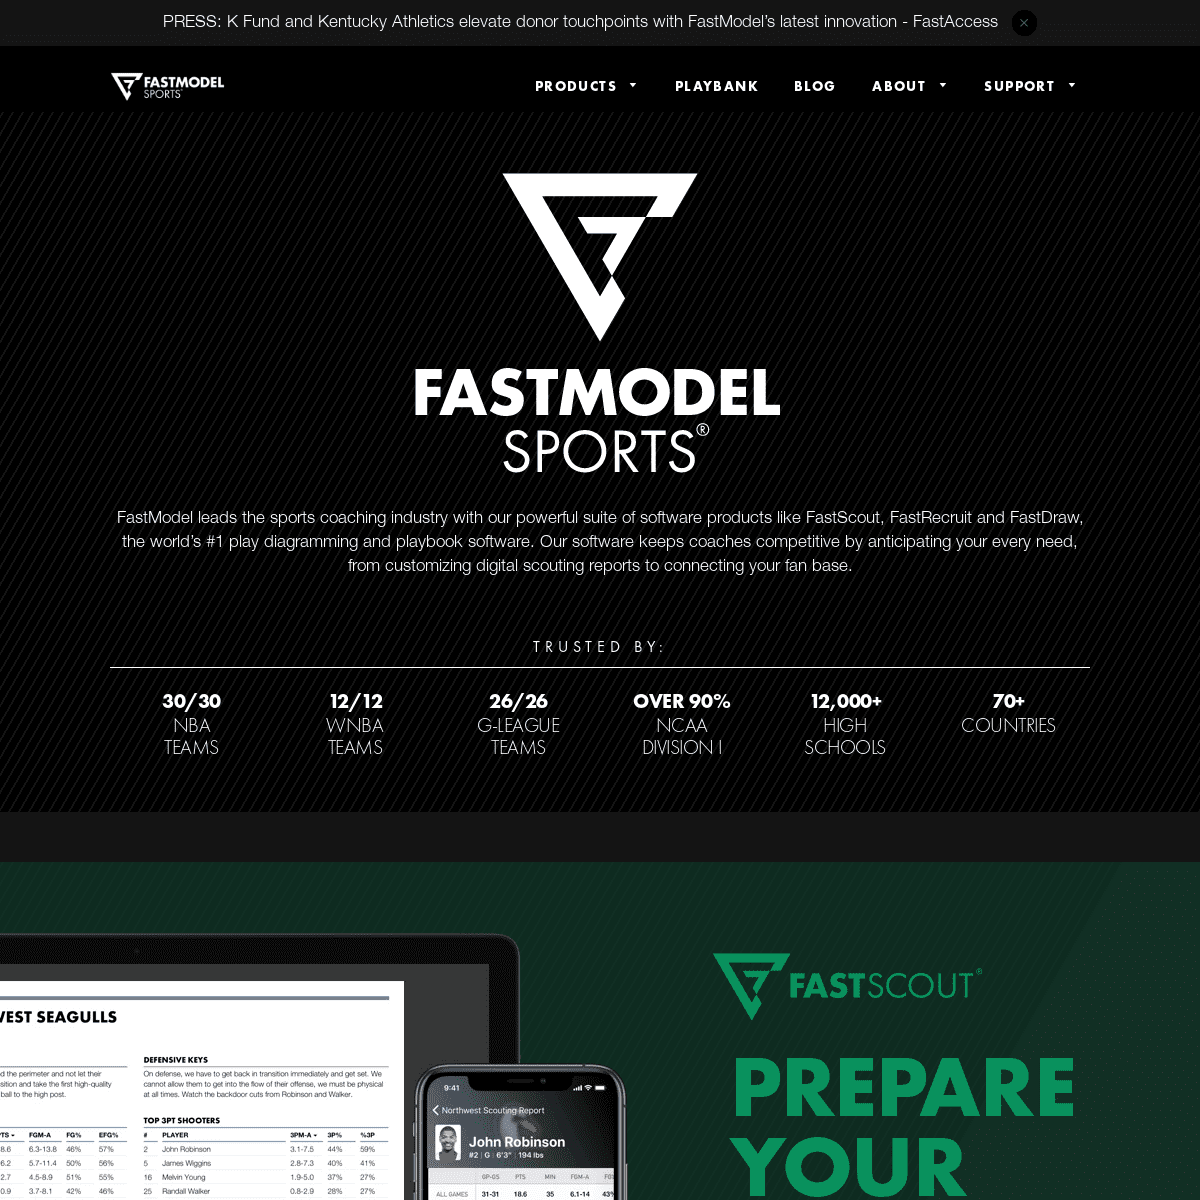 A complete backup of fastmodelsports.com